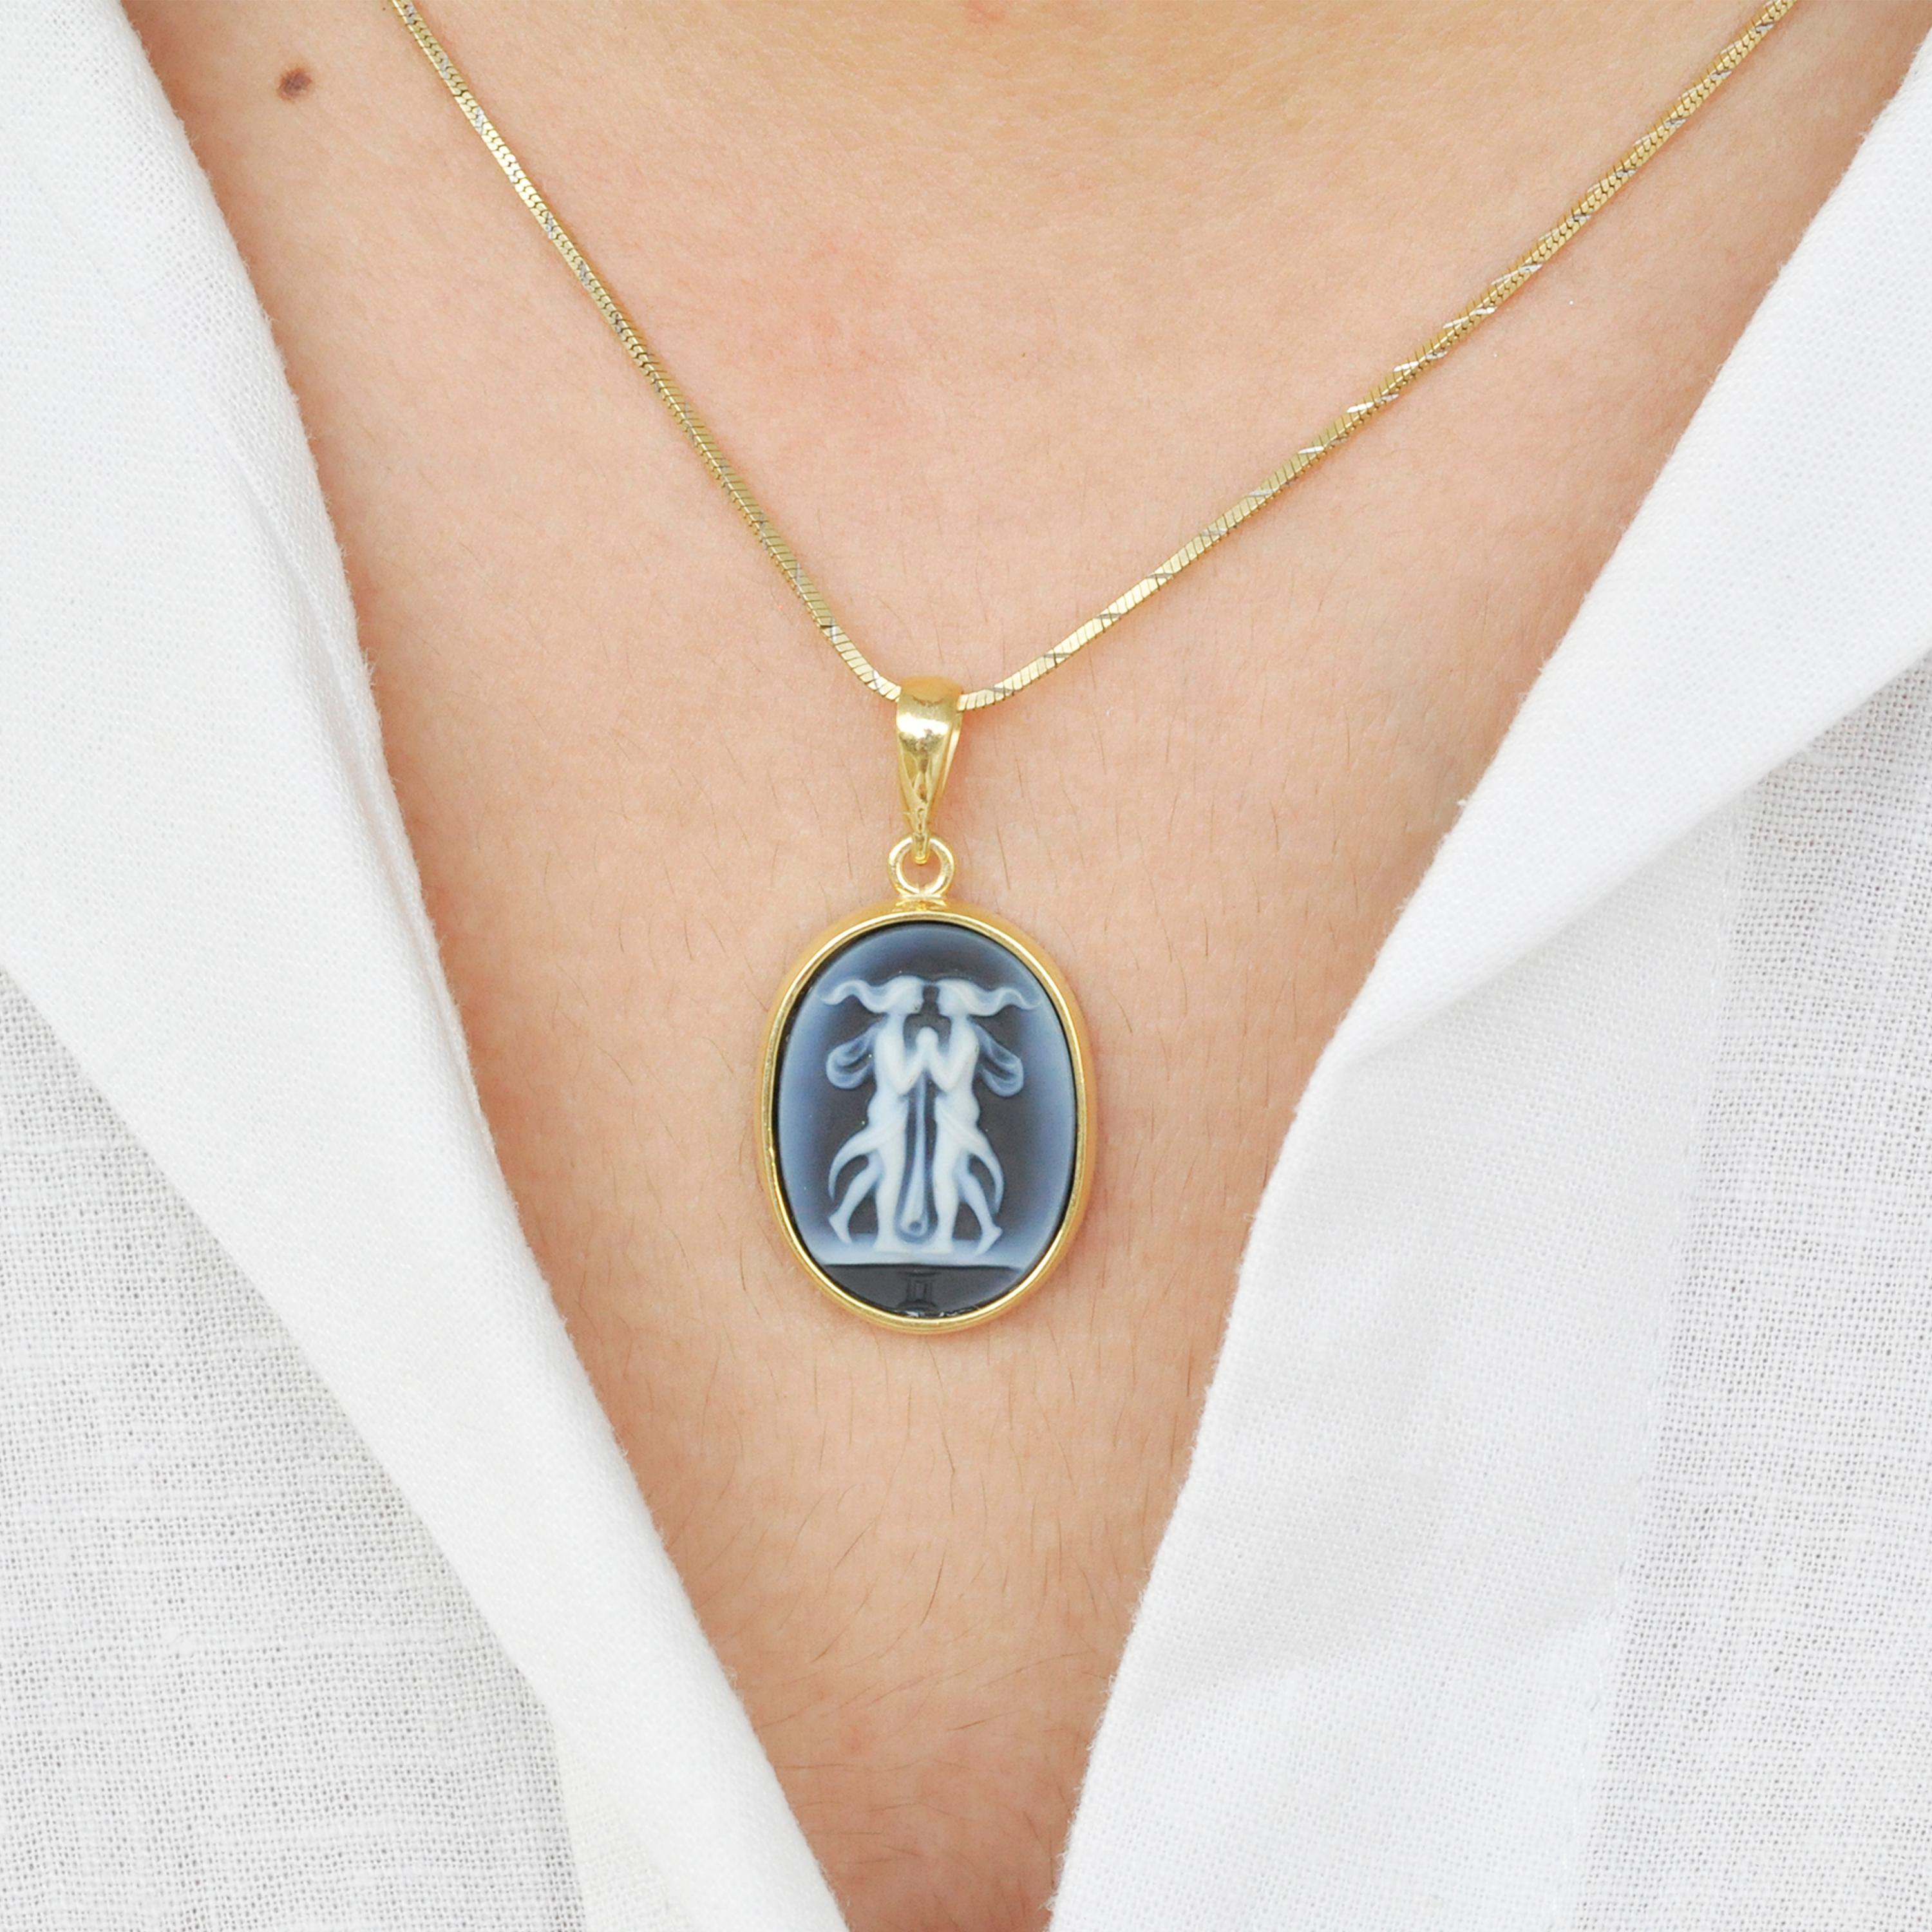 The Gemini Zodiac Carving Cameo Pendant Necklace is a unique and elegant piece of jewelry from a zodiac-inspired collection. The pendant features a beautifully engraved cameo made in Germany by a skilled cameo engraver. The cameo is carved on a